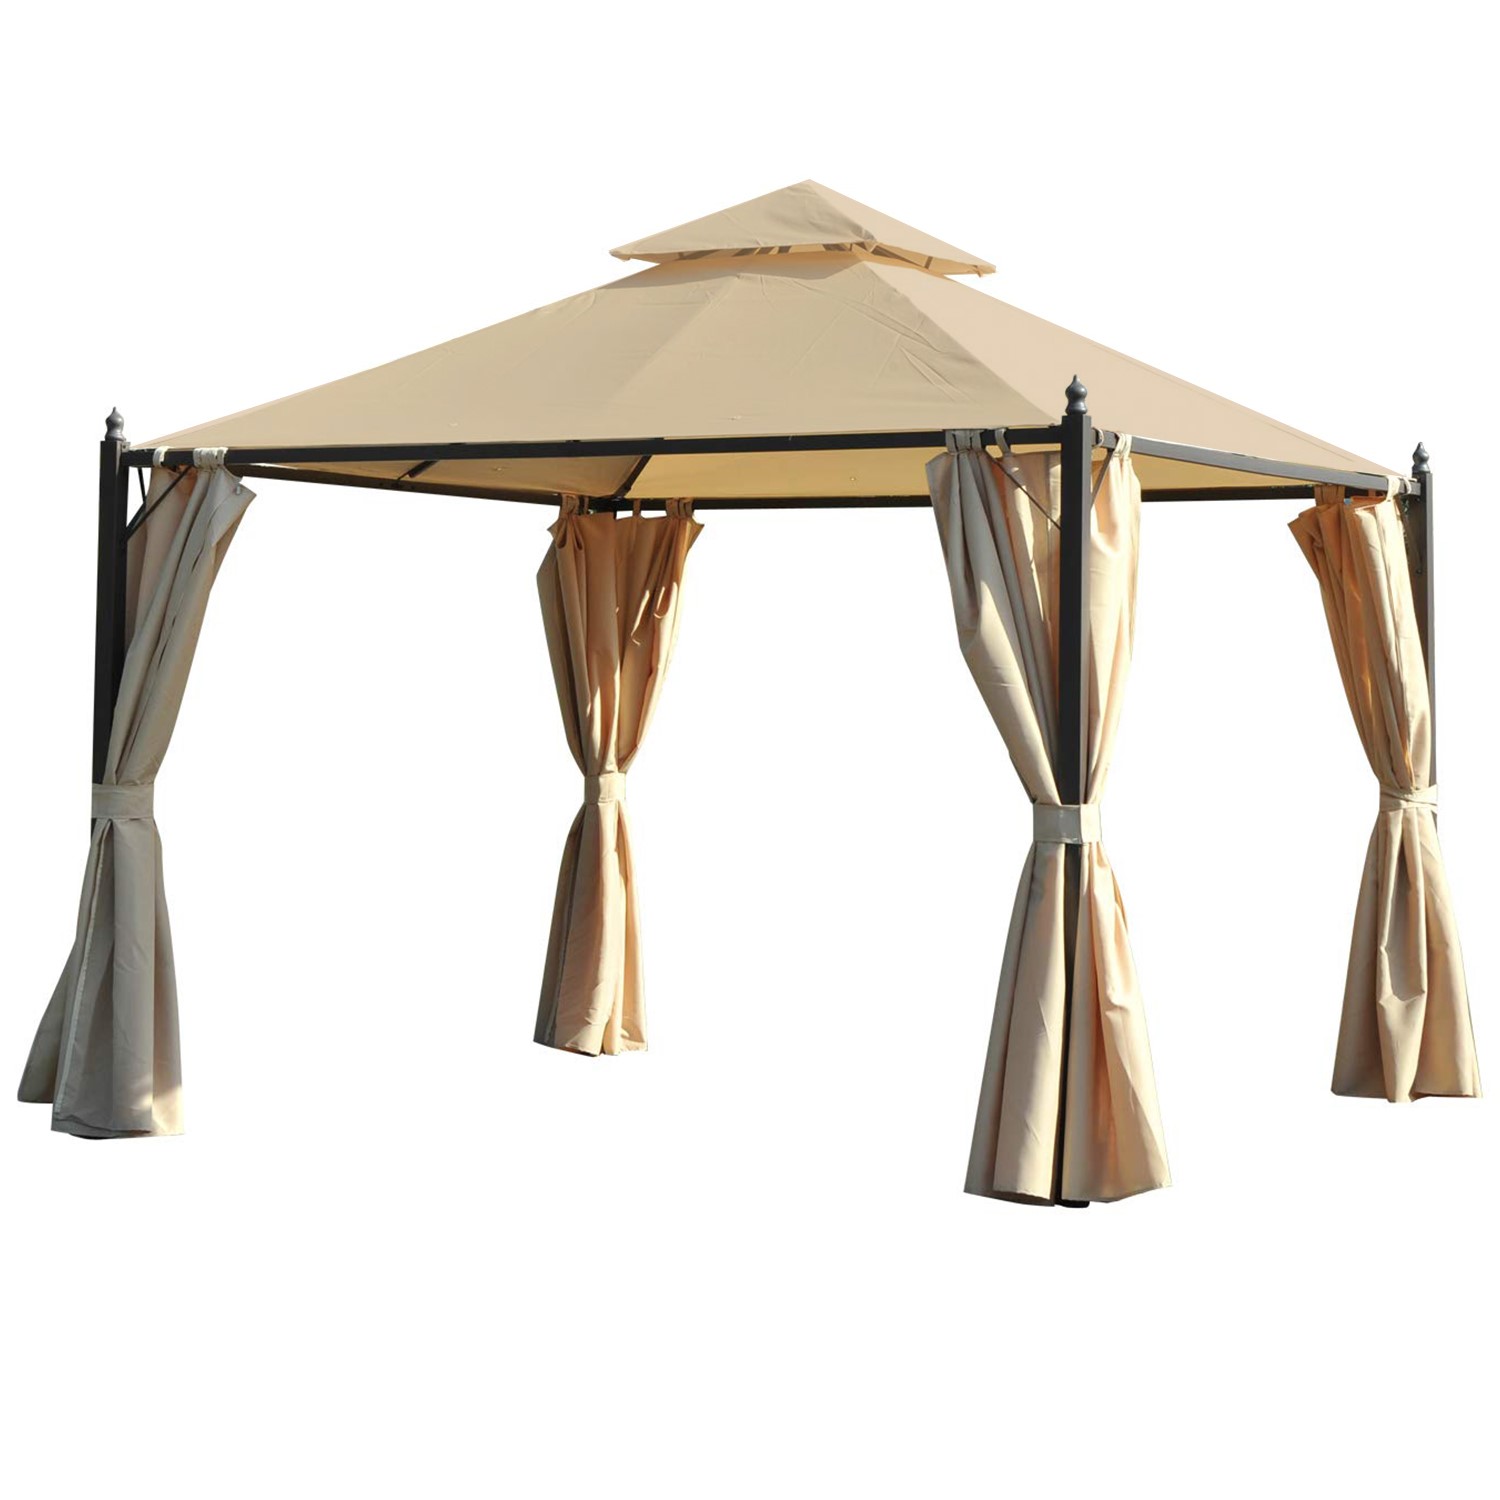 Replacement Canopy for 84C-033 10 x 10 Gazebo - Riplock 350